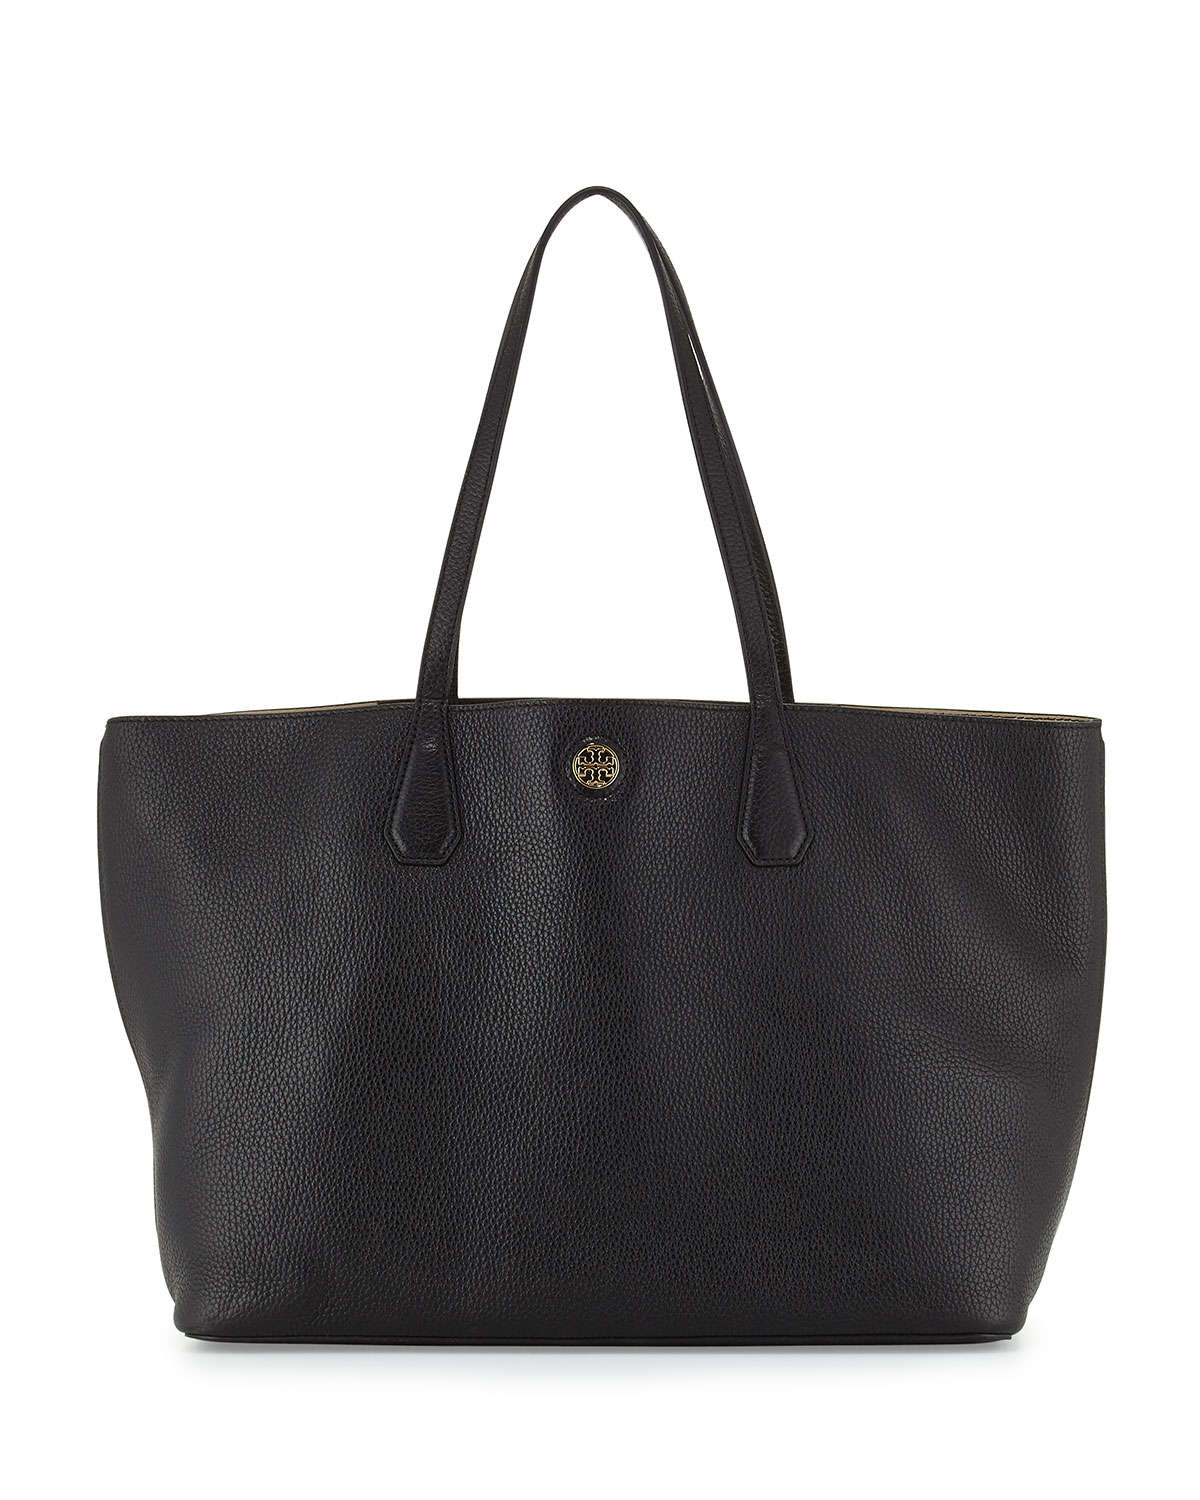 Lyst - Tory burch Perry Leather Tote Bag in Black